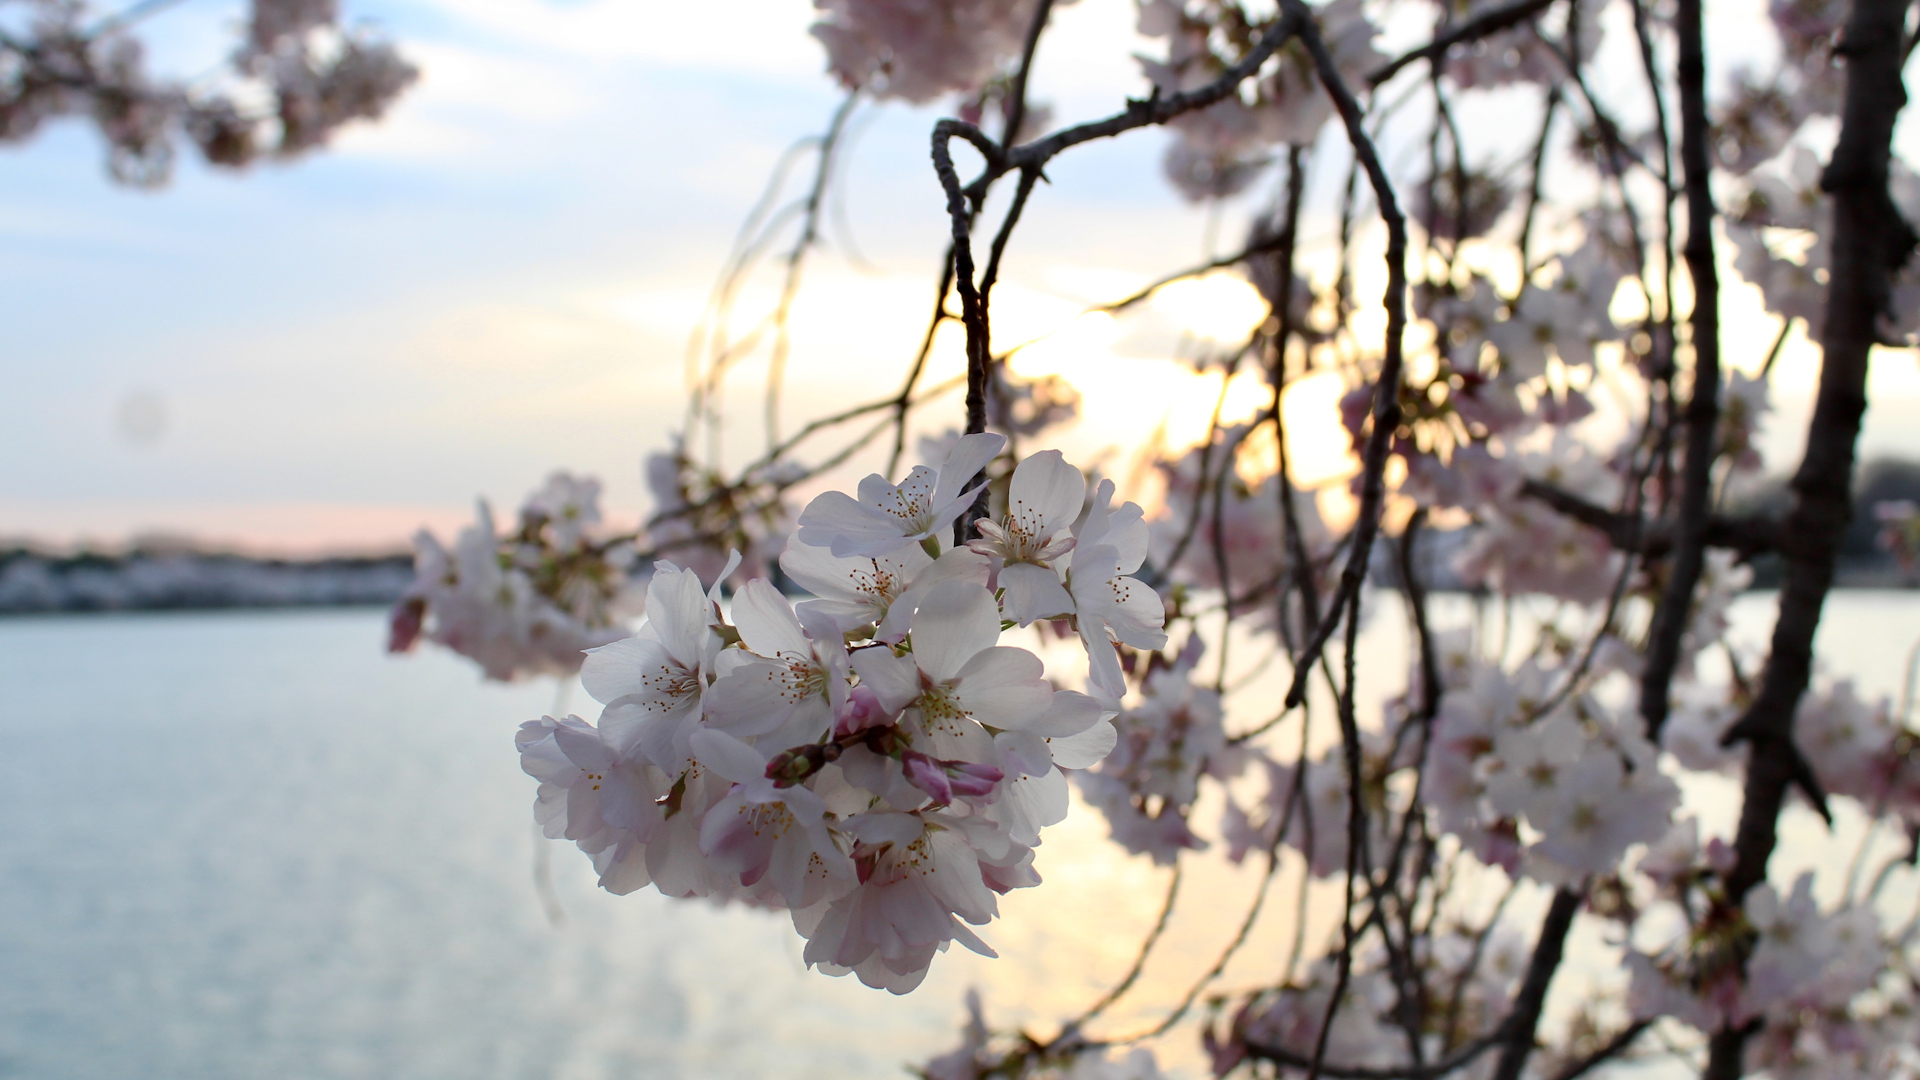 Press Release】Magical Cherry Blossom Experience off the Beaten